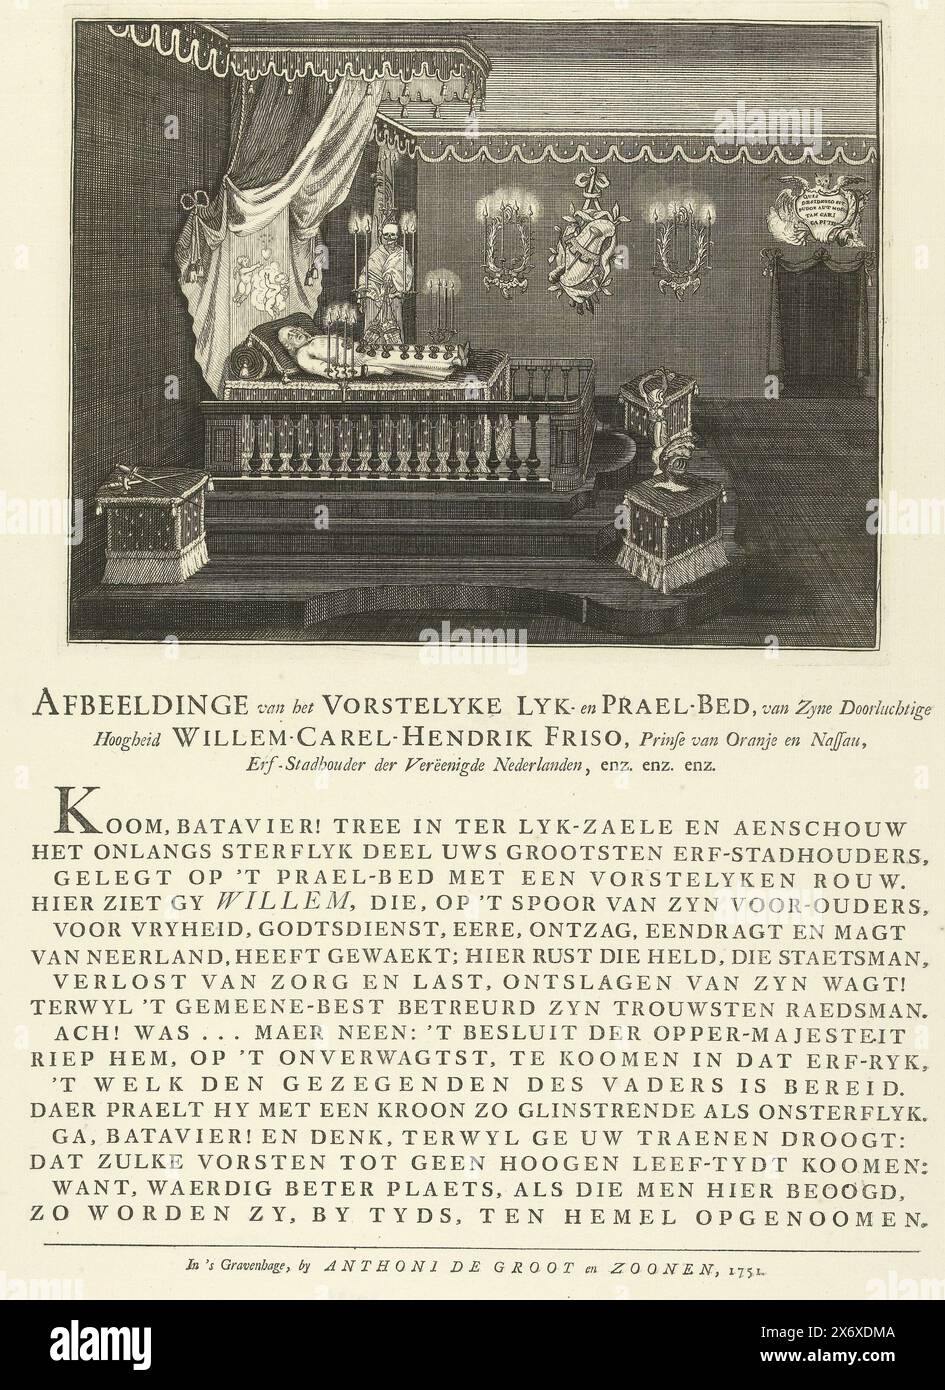 Grand bed of Prince Willem IV, 1751, Image of the Vorstelyke Lyk and Prael Bed, of His Serene Highness Willem-Carel-Hendrik Friso, Princess of Orange and Nassau (...) (title on object), Funeral room with the grand bed of Prince William IV, who died on October 22, and where he lay in state during the months of November and December of the year 1751. There is a verse on the sheet under the plate., print, print maker: anonymous, publisher: Anthoni de Groot & Zoonen, (mentioned on object), print maker: Northern Netherlands, publisher: The Hague, 1751, paper, etching, engraving, letterpress printin Stock Photo